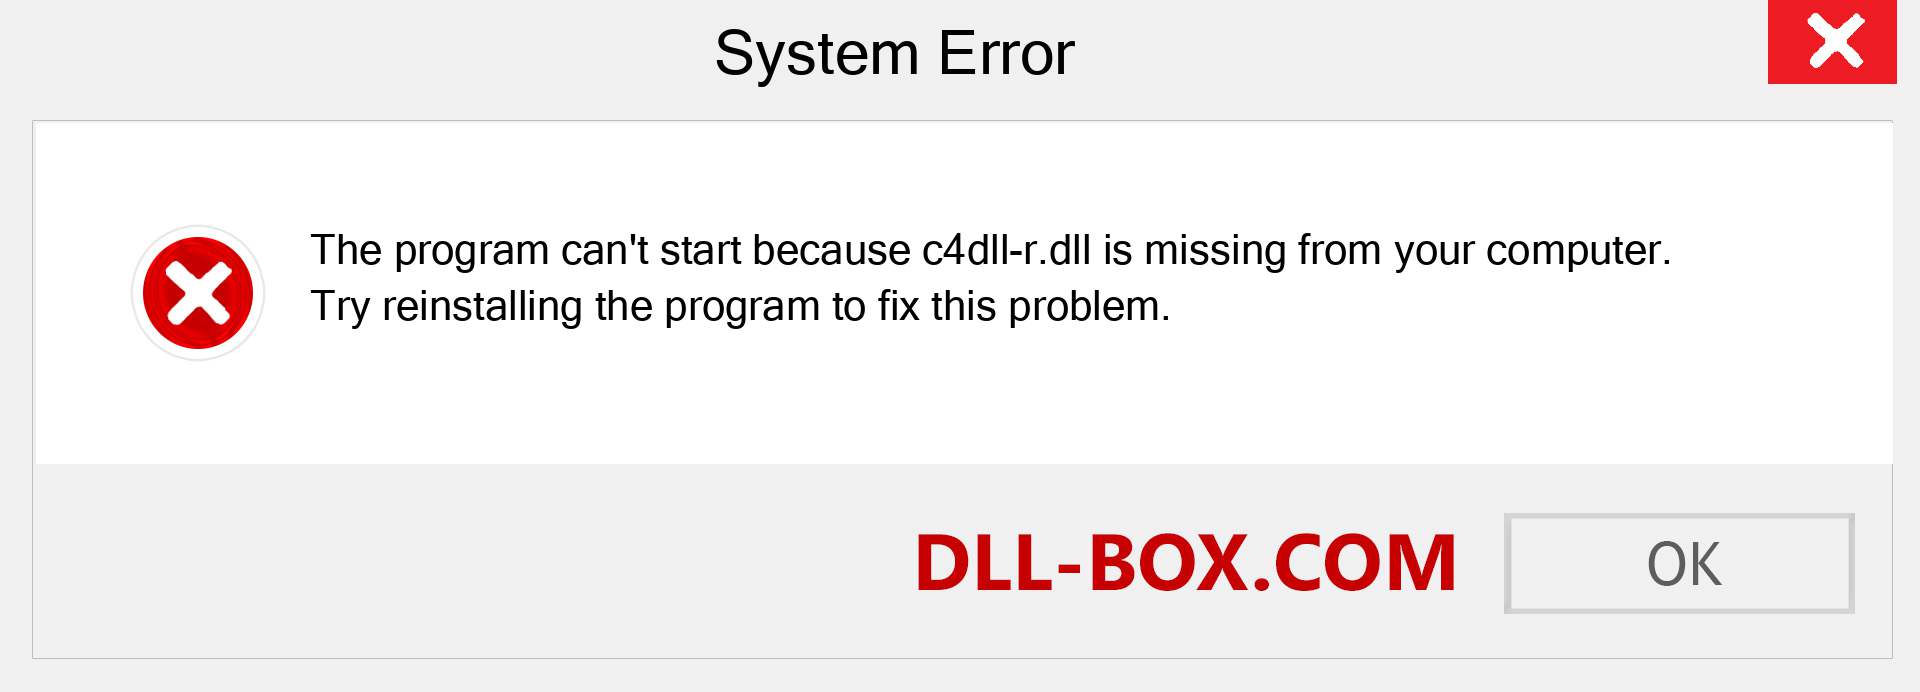  c4dll-r.dll file is missing?. Download for Windows 7, 8, 10 - Fix  c4dll-r dll Missing Error on Windows, photos, images